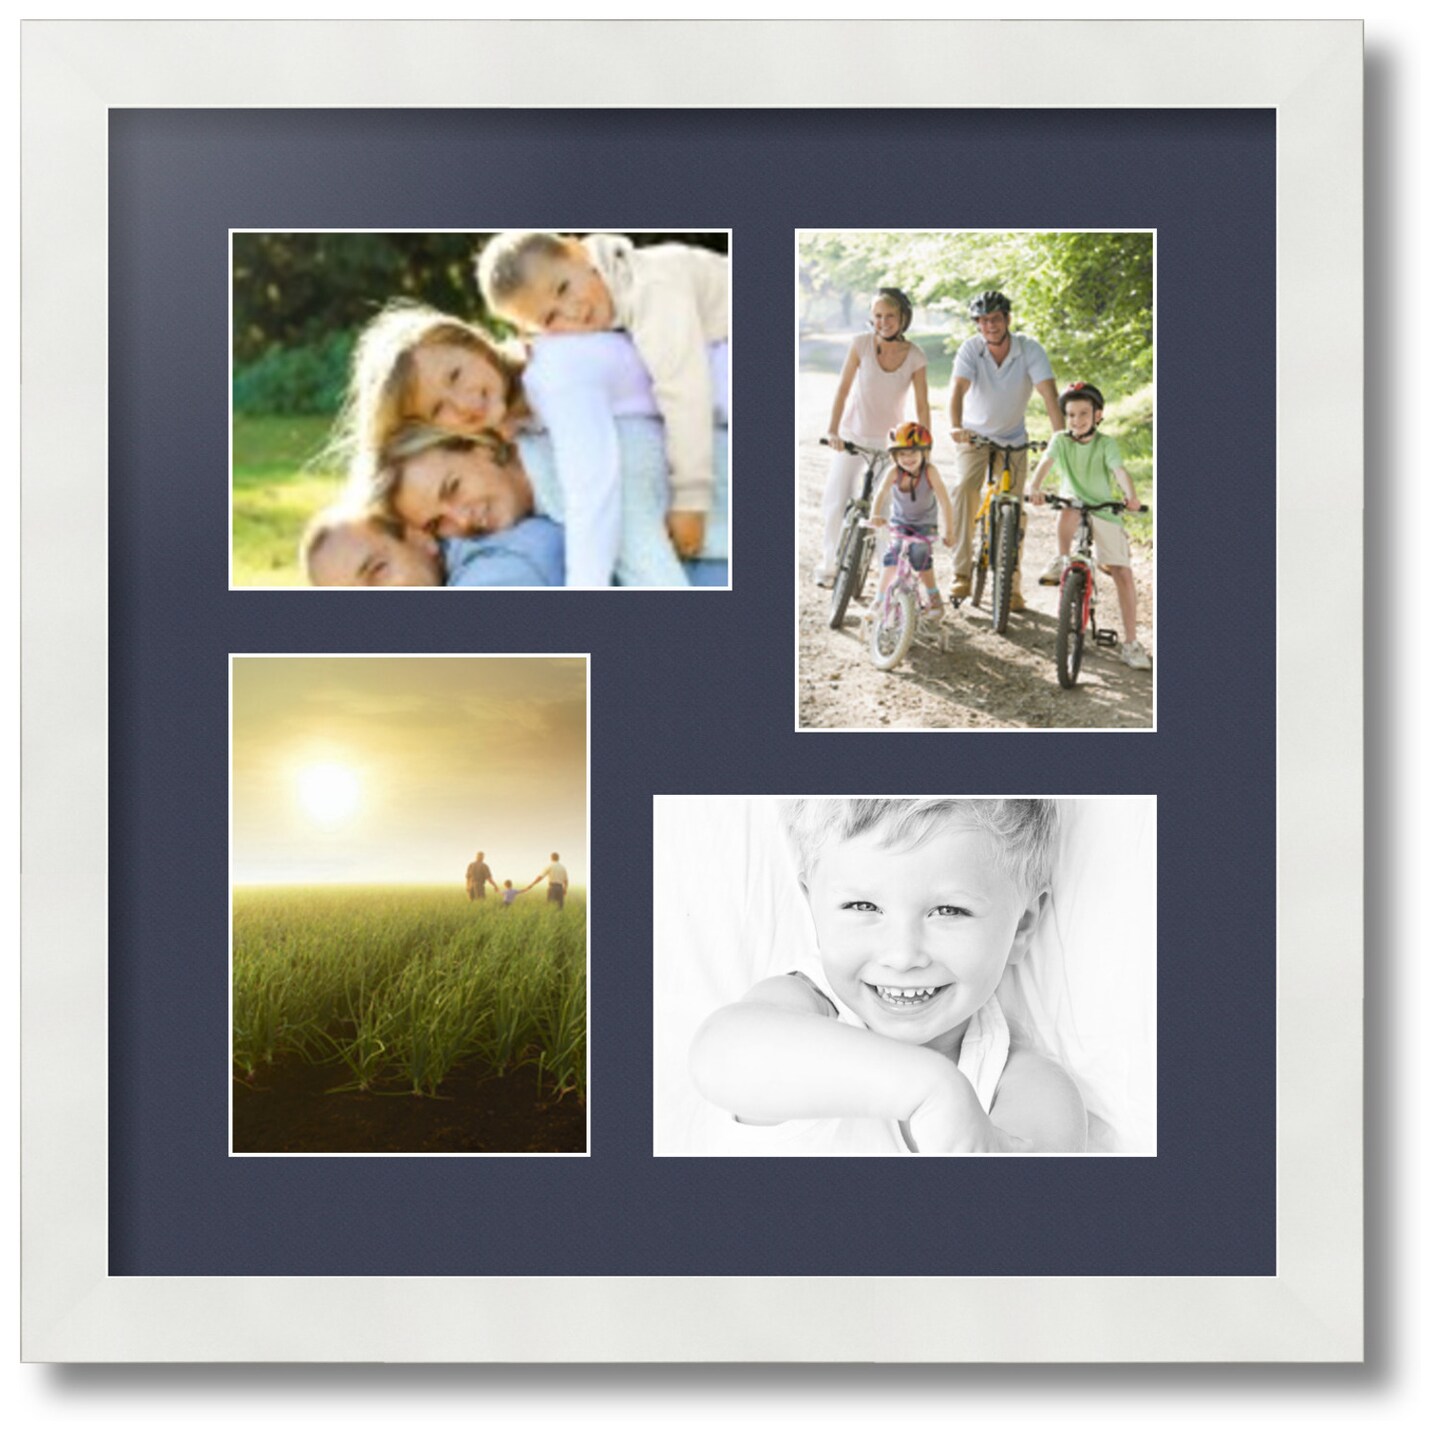 ArtToFrames Collage Photo Picture Frame with 4 - 5x7 inch Openings, Framed in White with Over 62 Mat Color Options and Plexi Glass (CSM-3966-179)